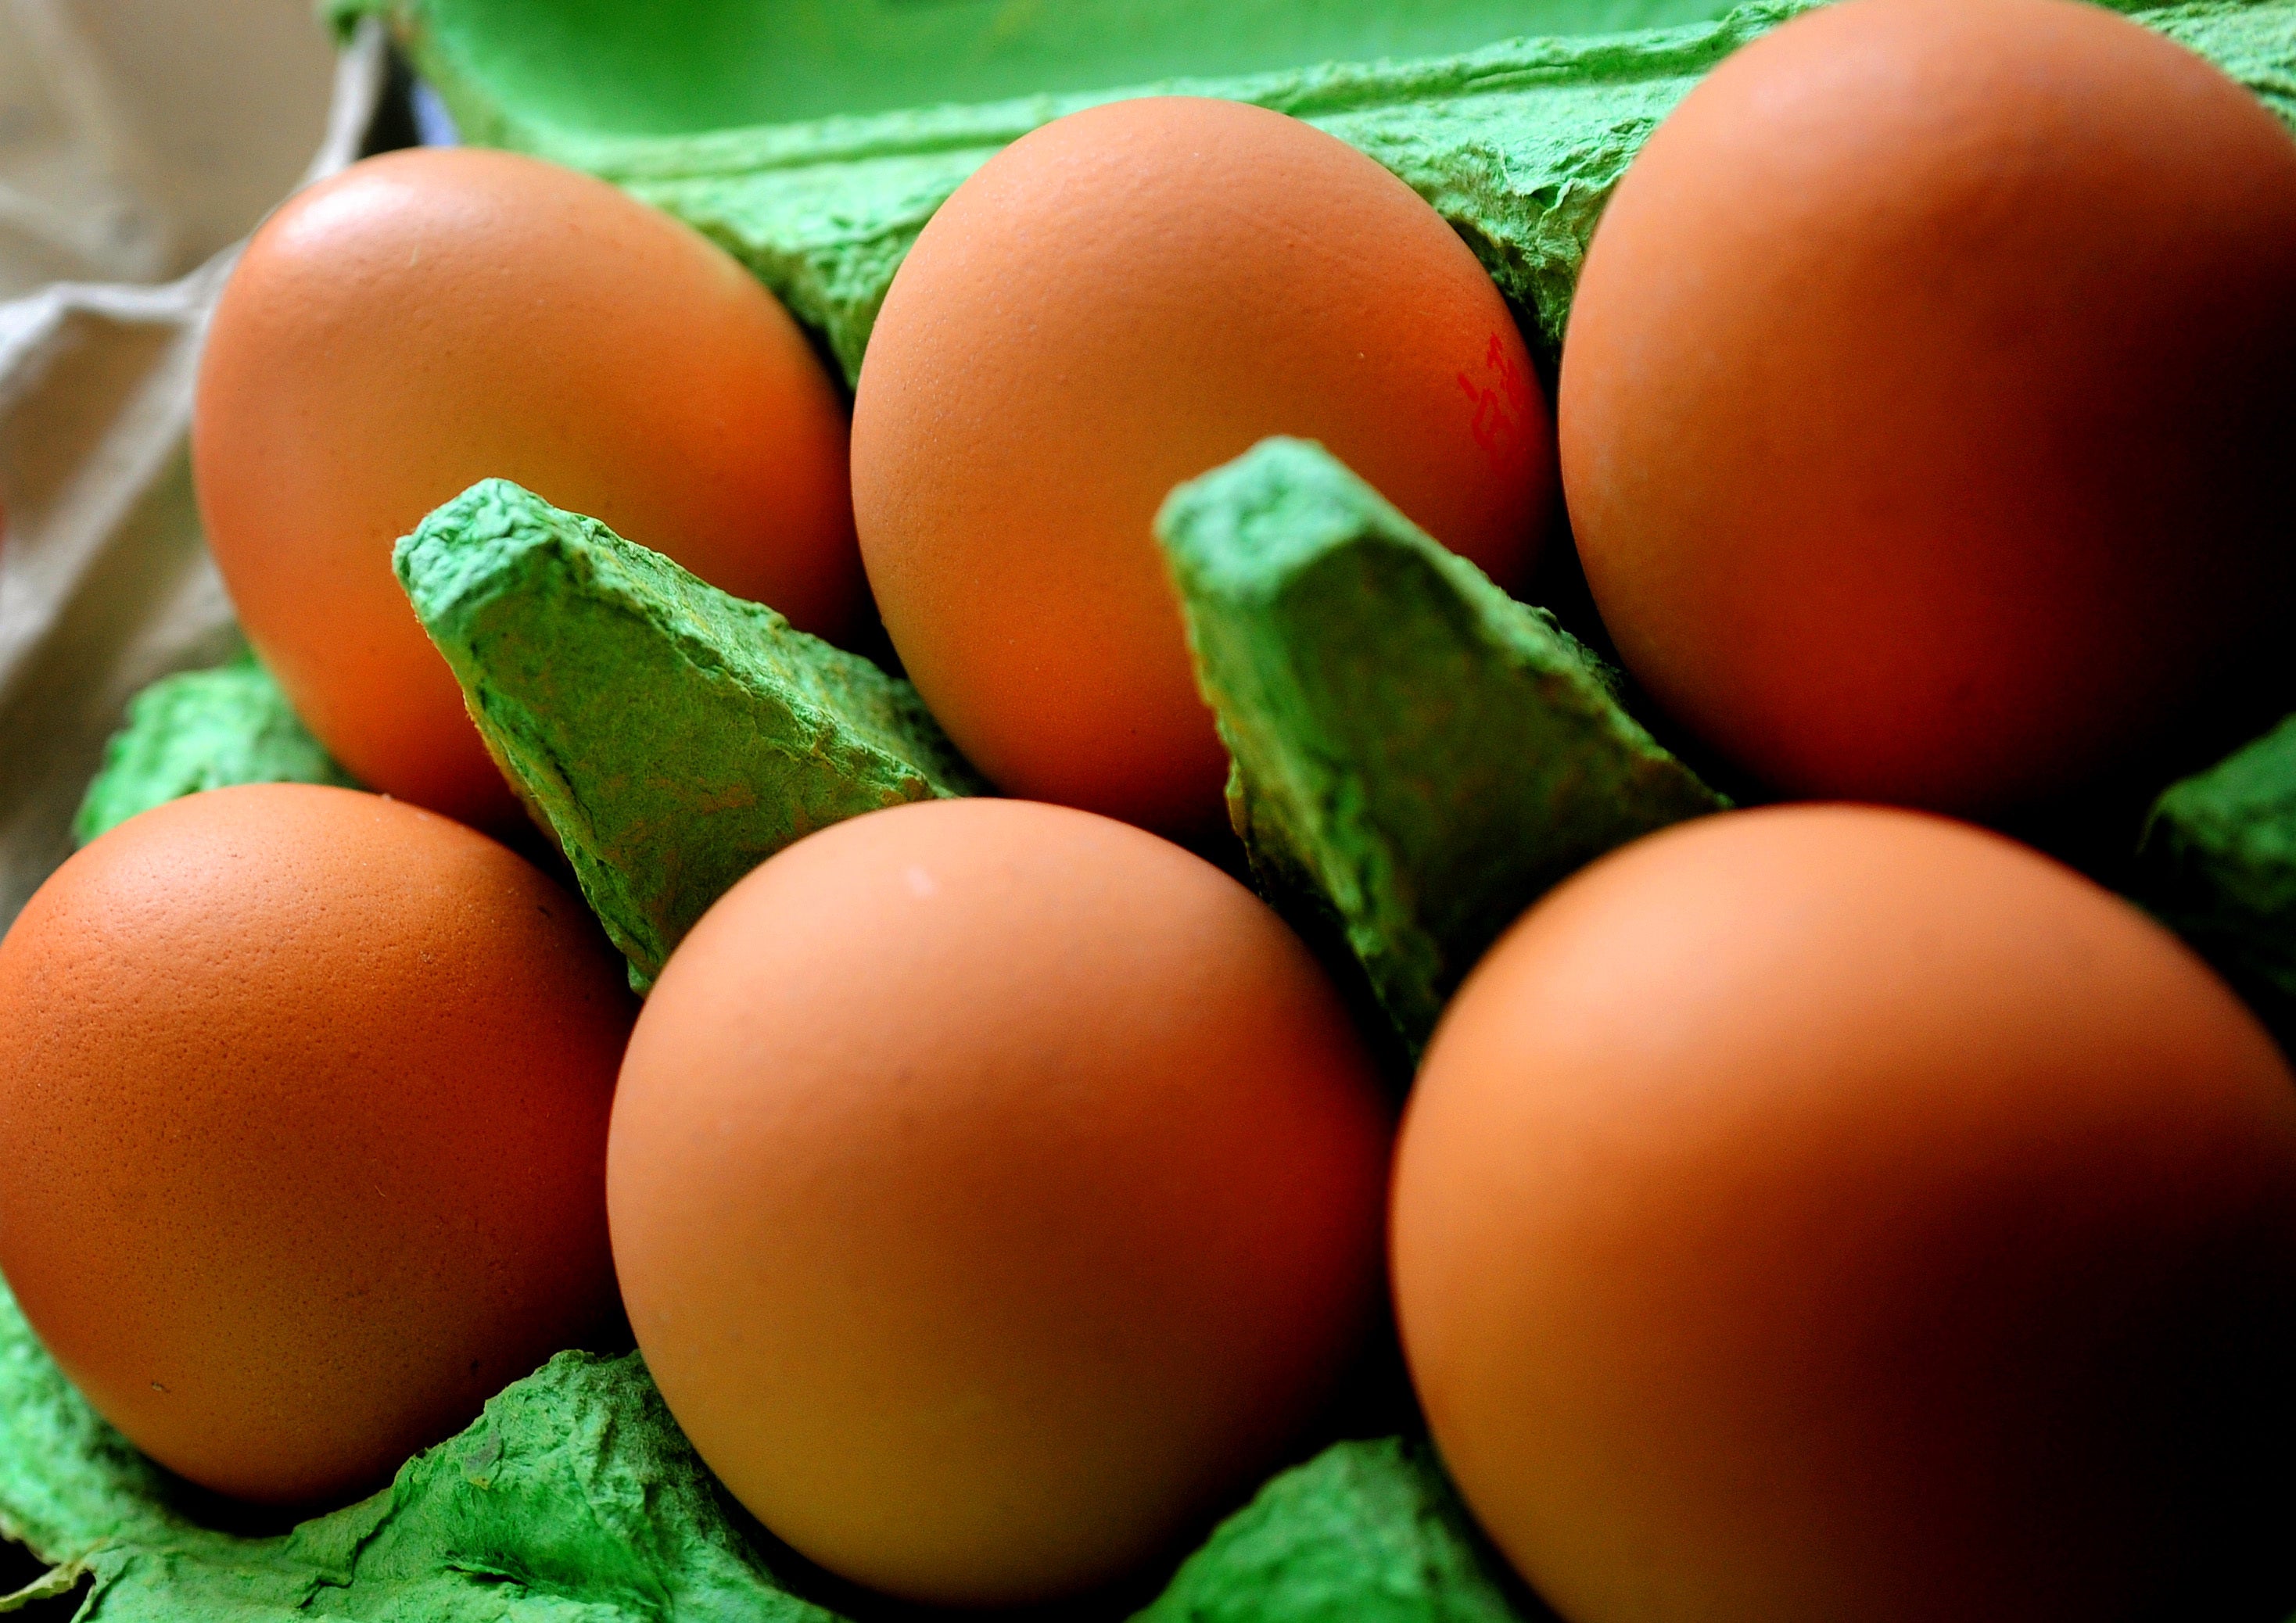 Egg producers say they are not even breaking even at current supermarket prices